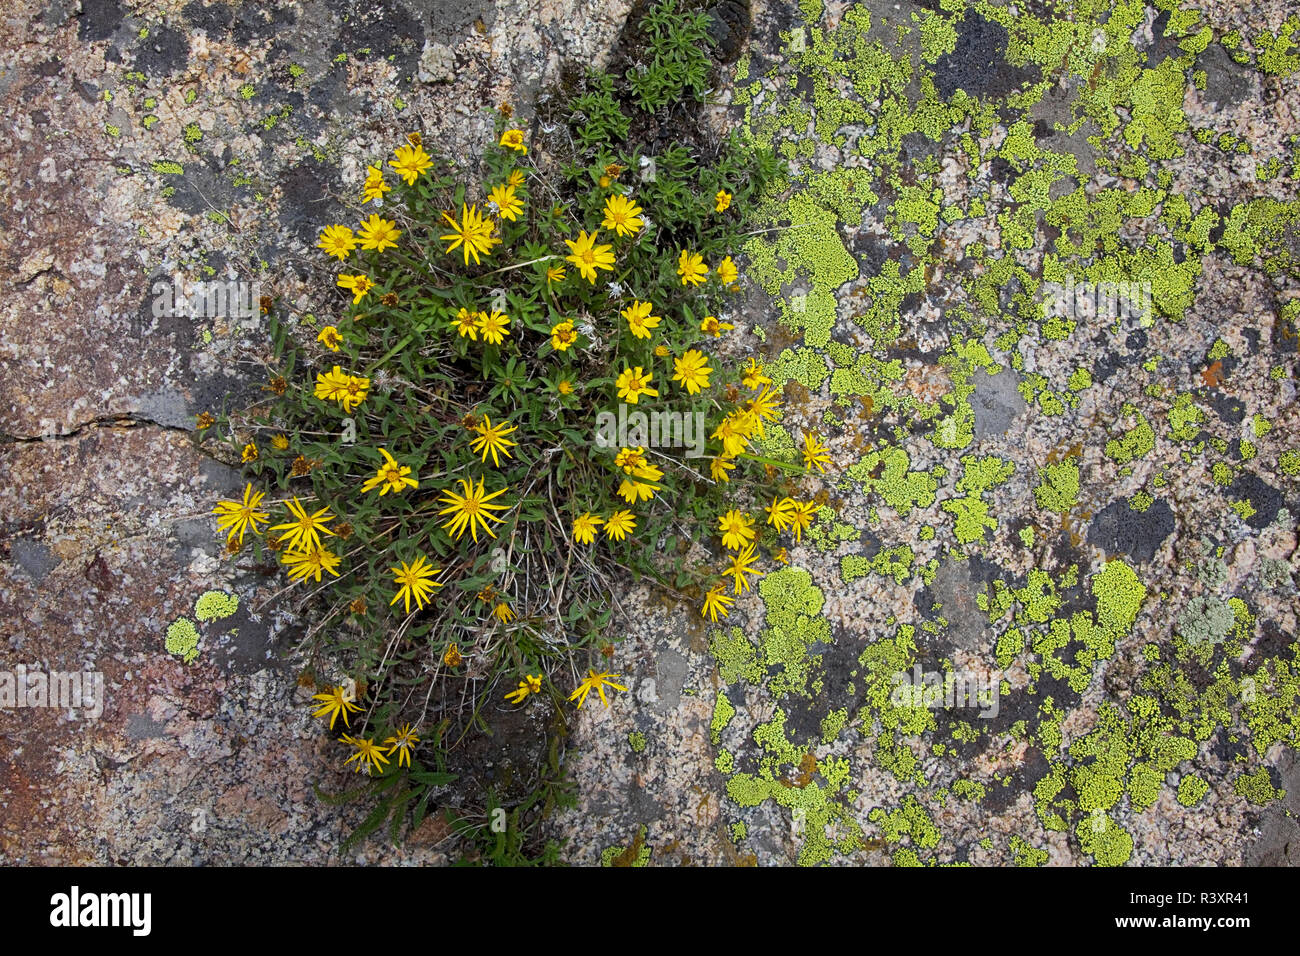 USA, Colorado, White River National Forest, horizontal, d'or, de l'Aster Nain Heterotheca pumila Banque D'Images